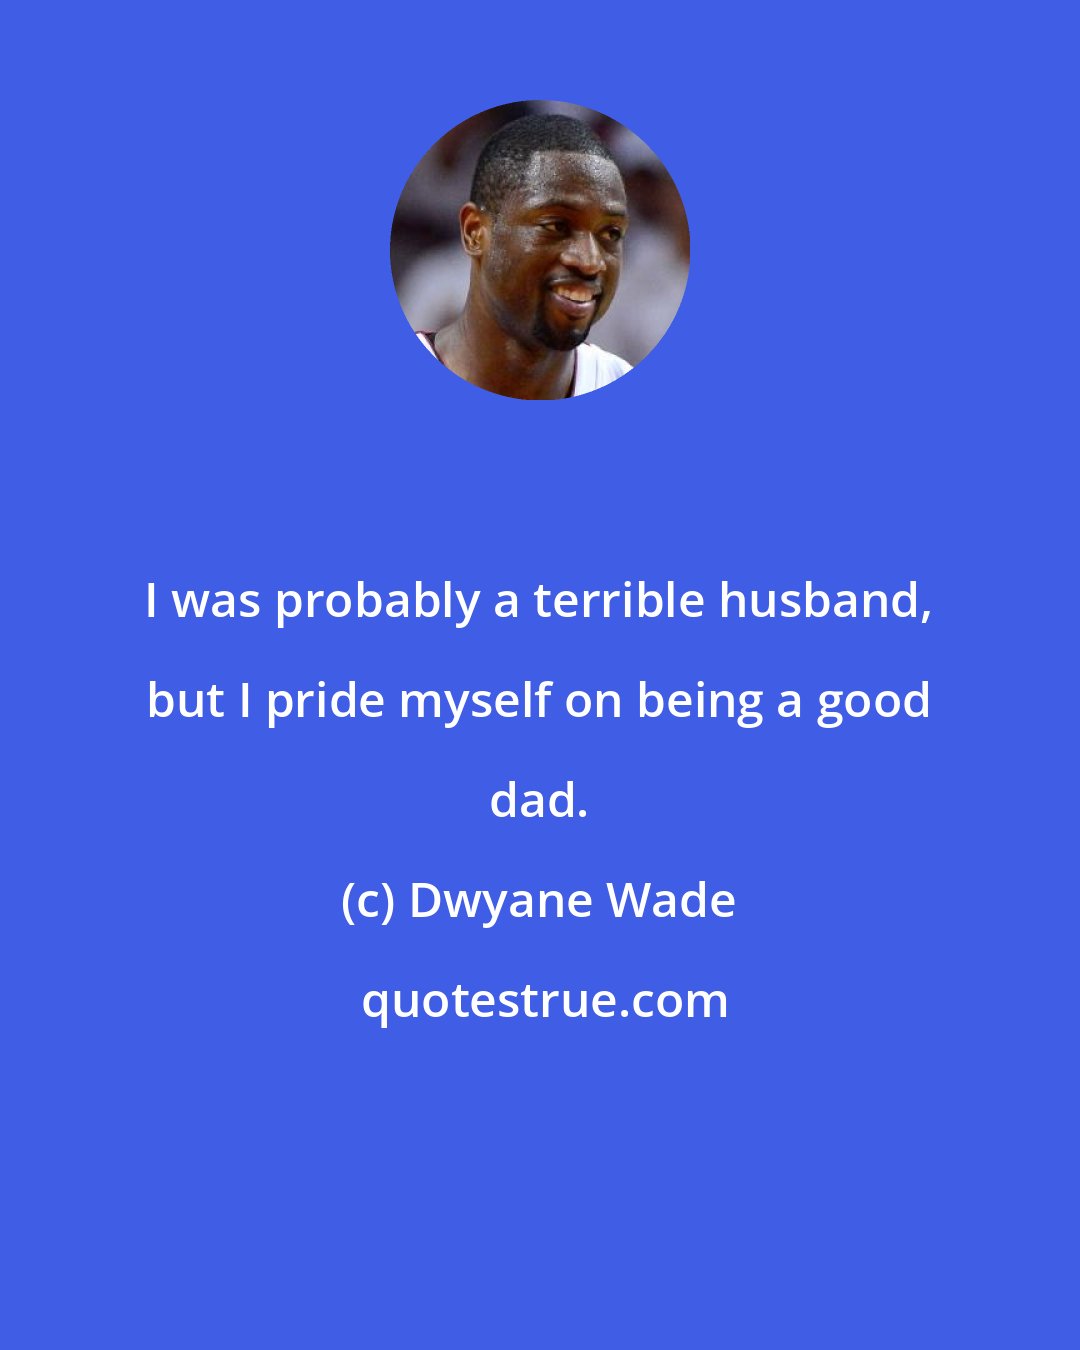 Dwyane Wade: I was probably a terrible husband, but I pride myself on being a good dad.